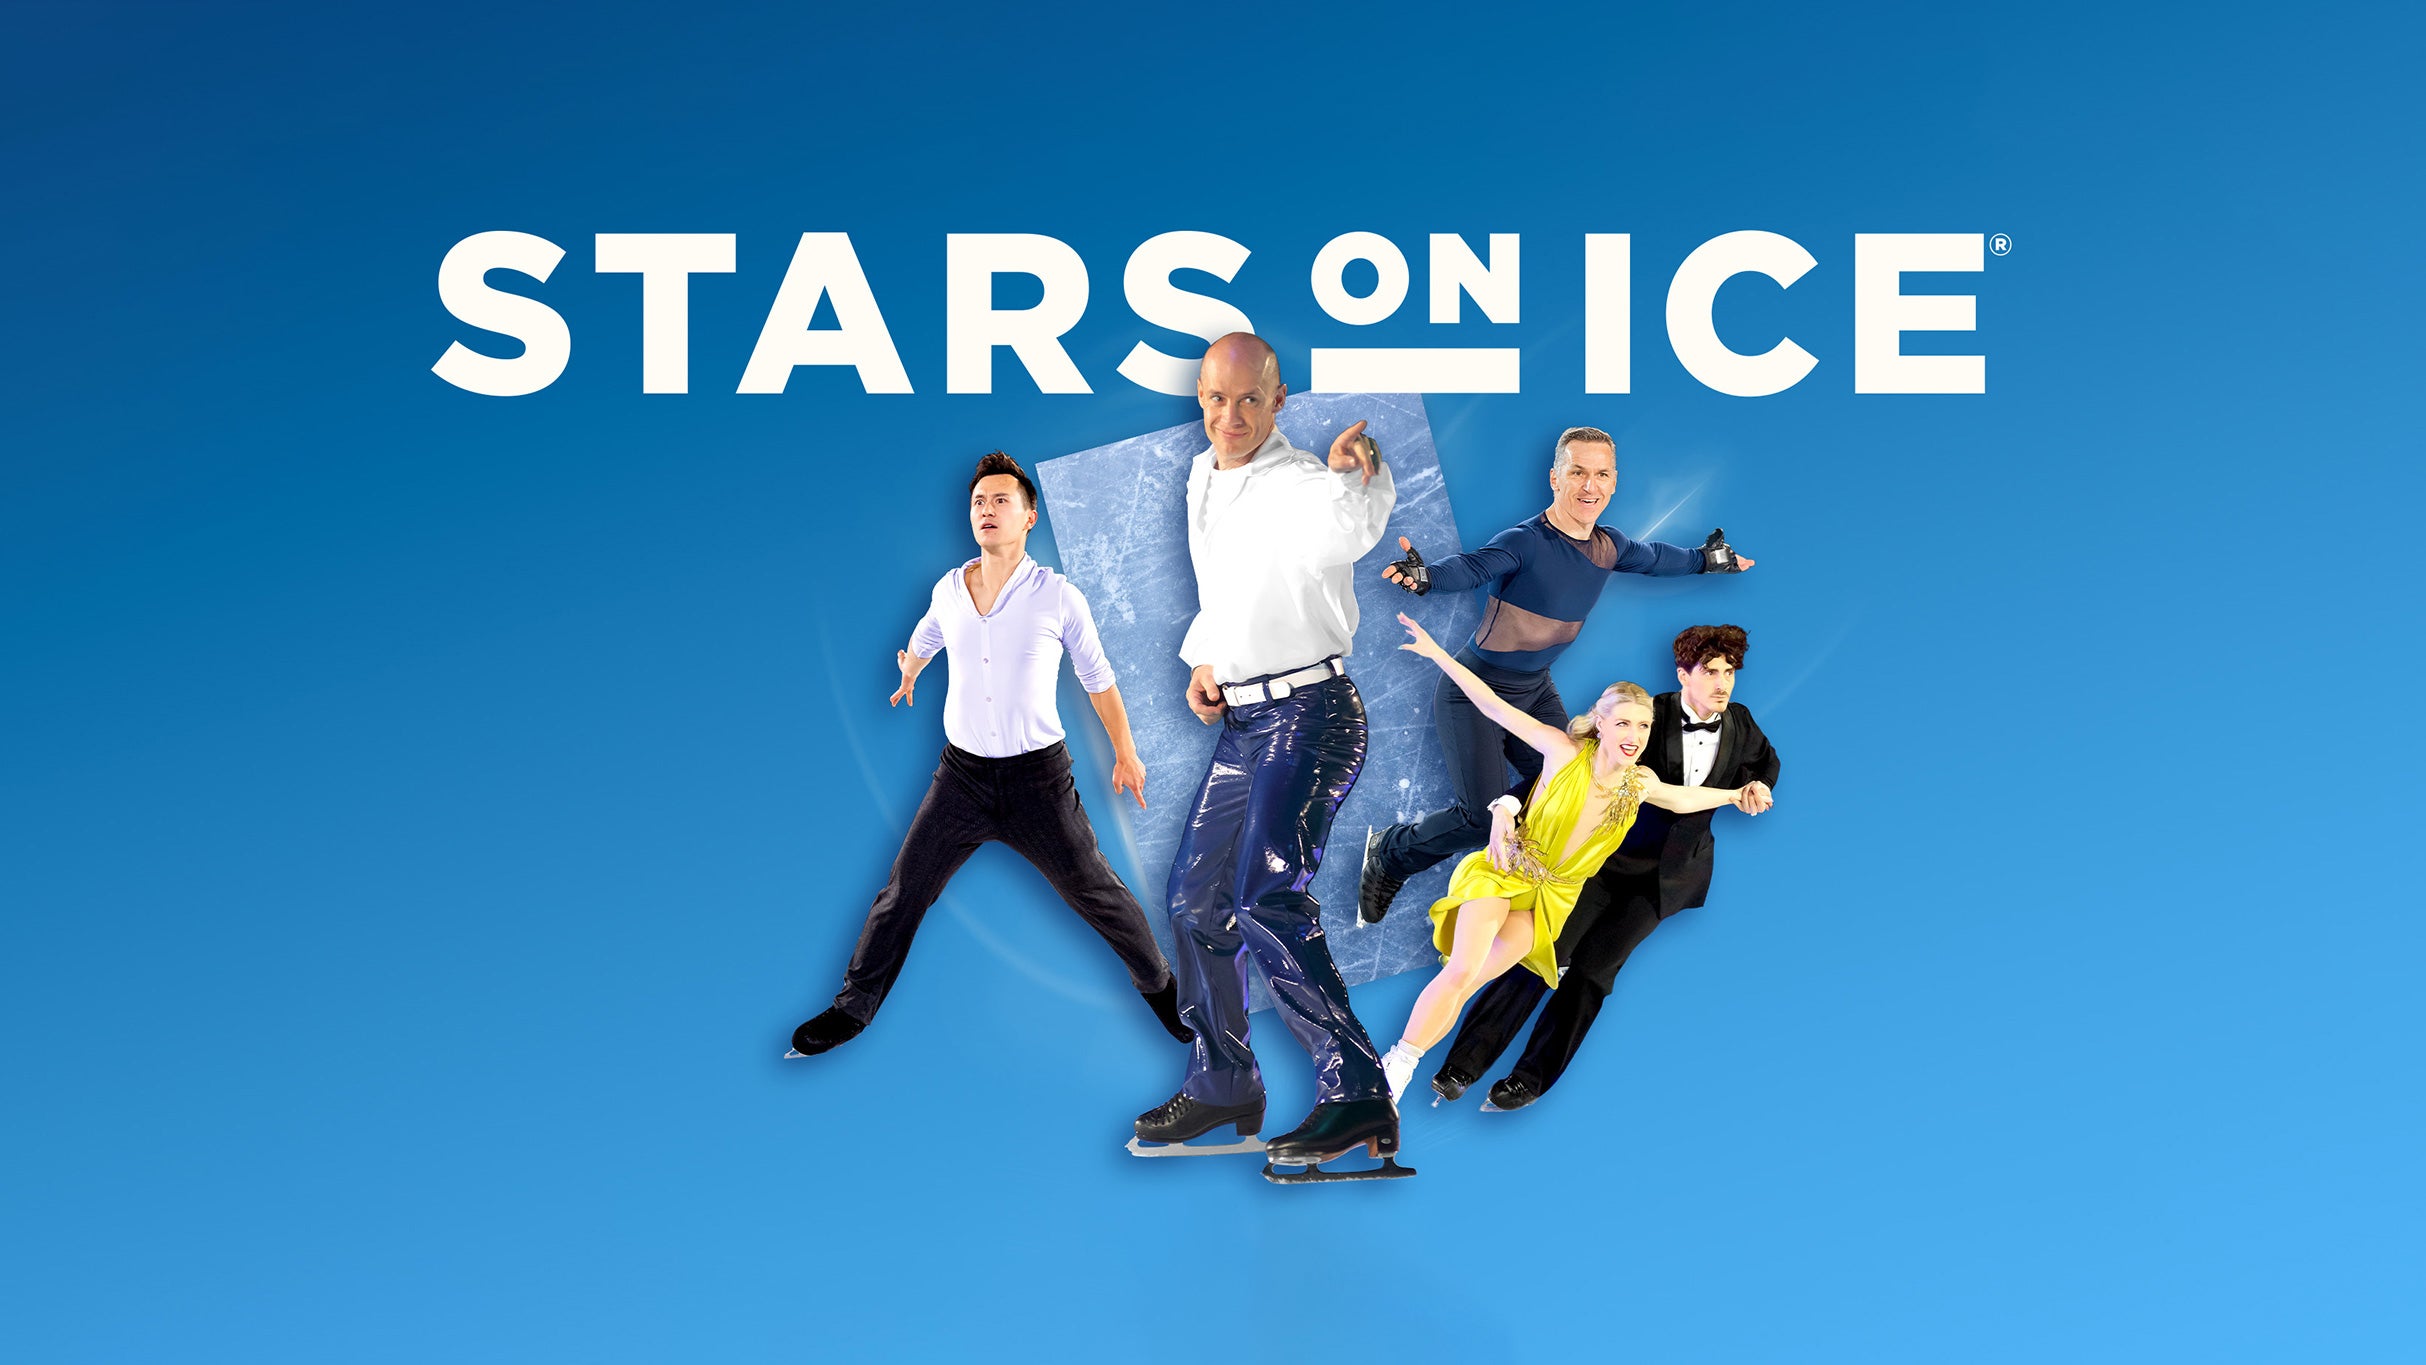 Stars on Ice - Canada in Toronto promo photo for First Class presale offer code